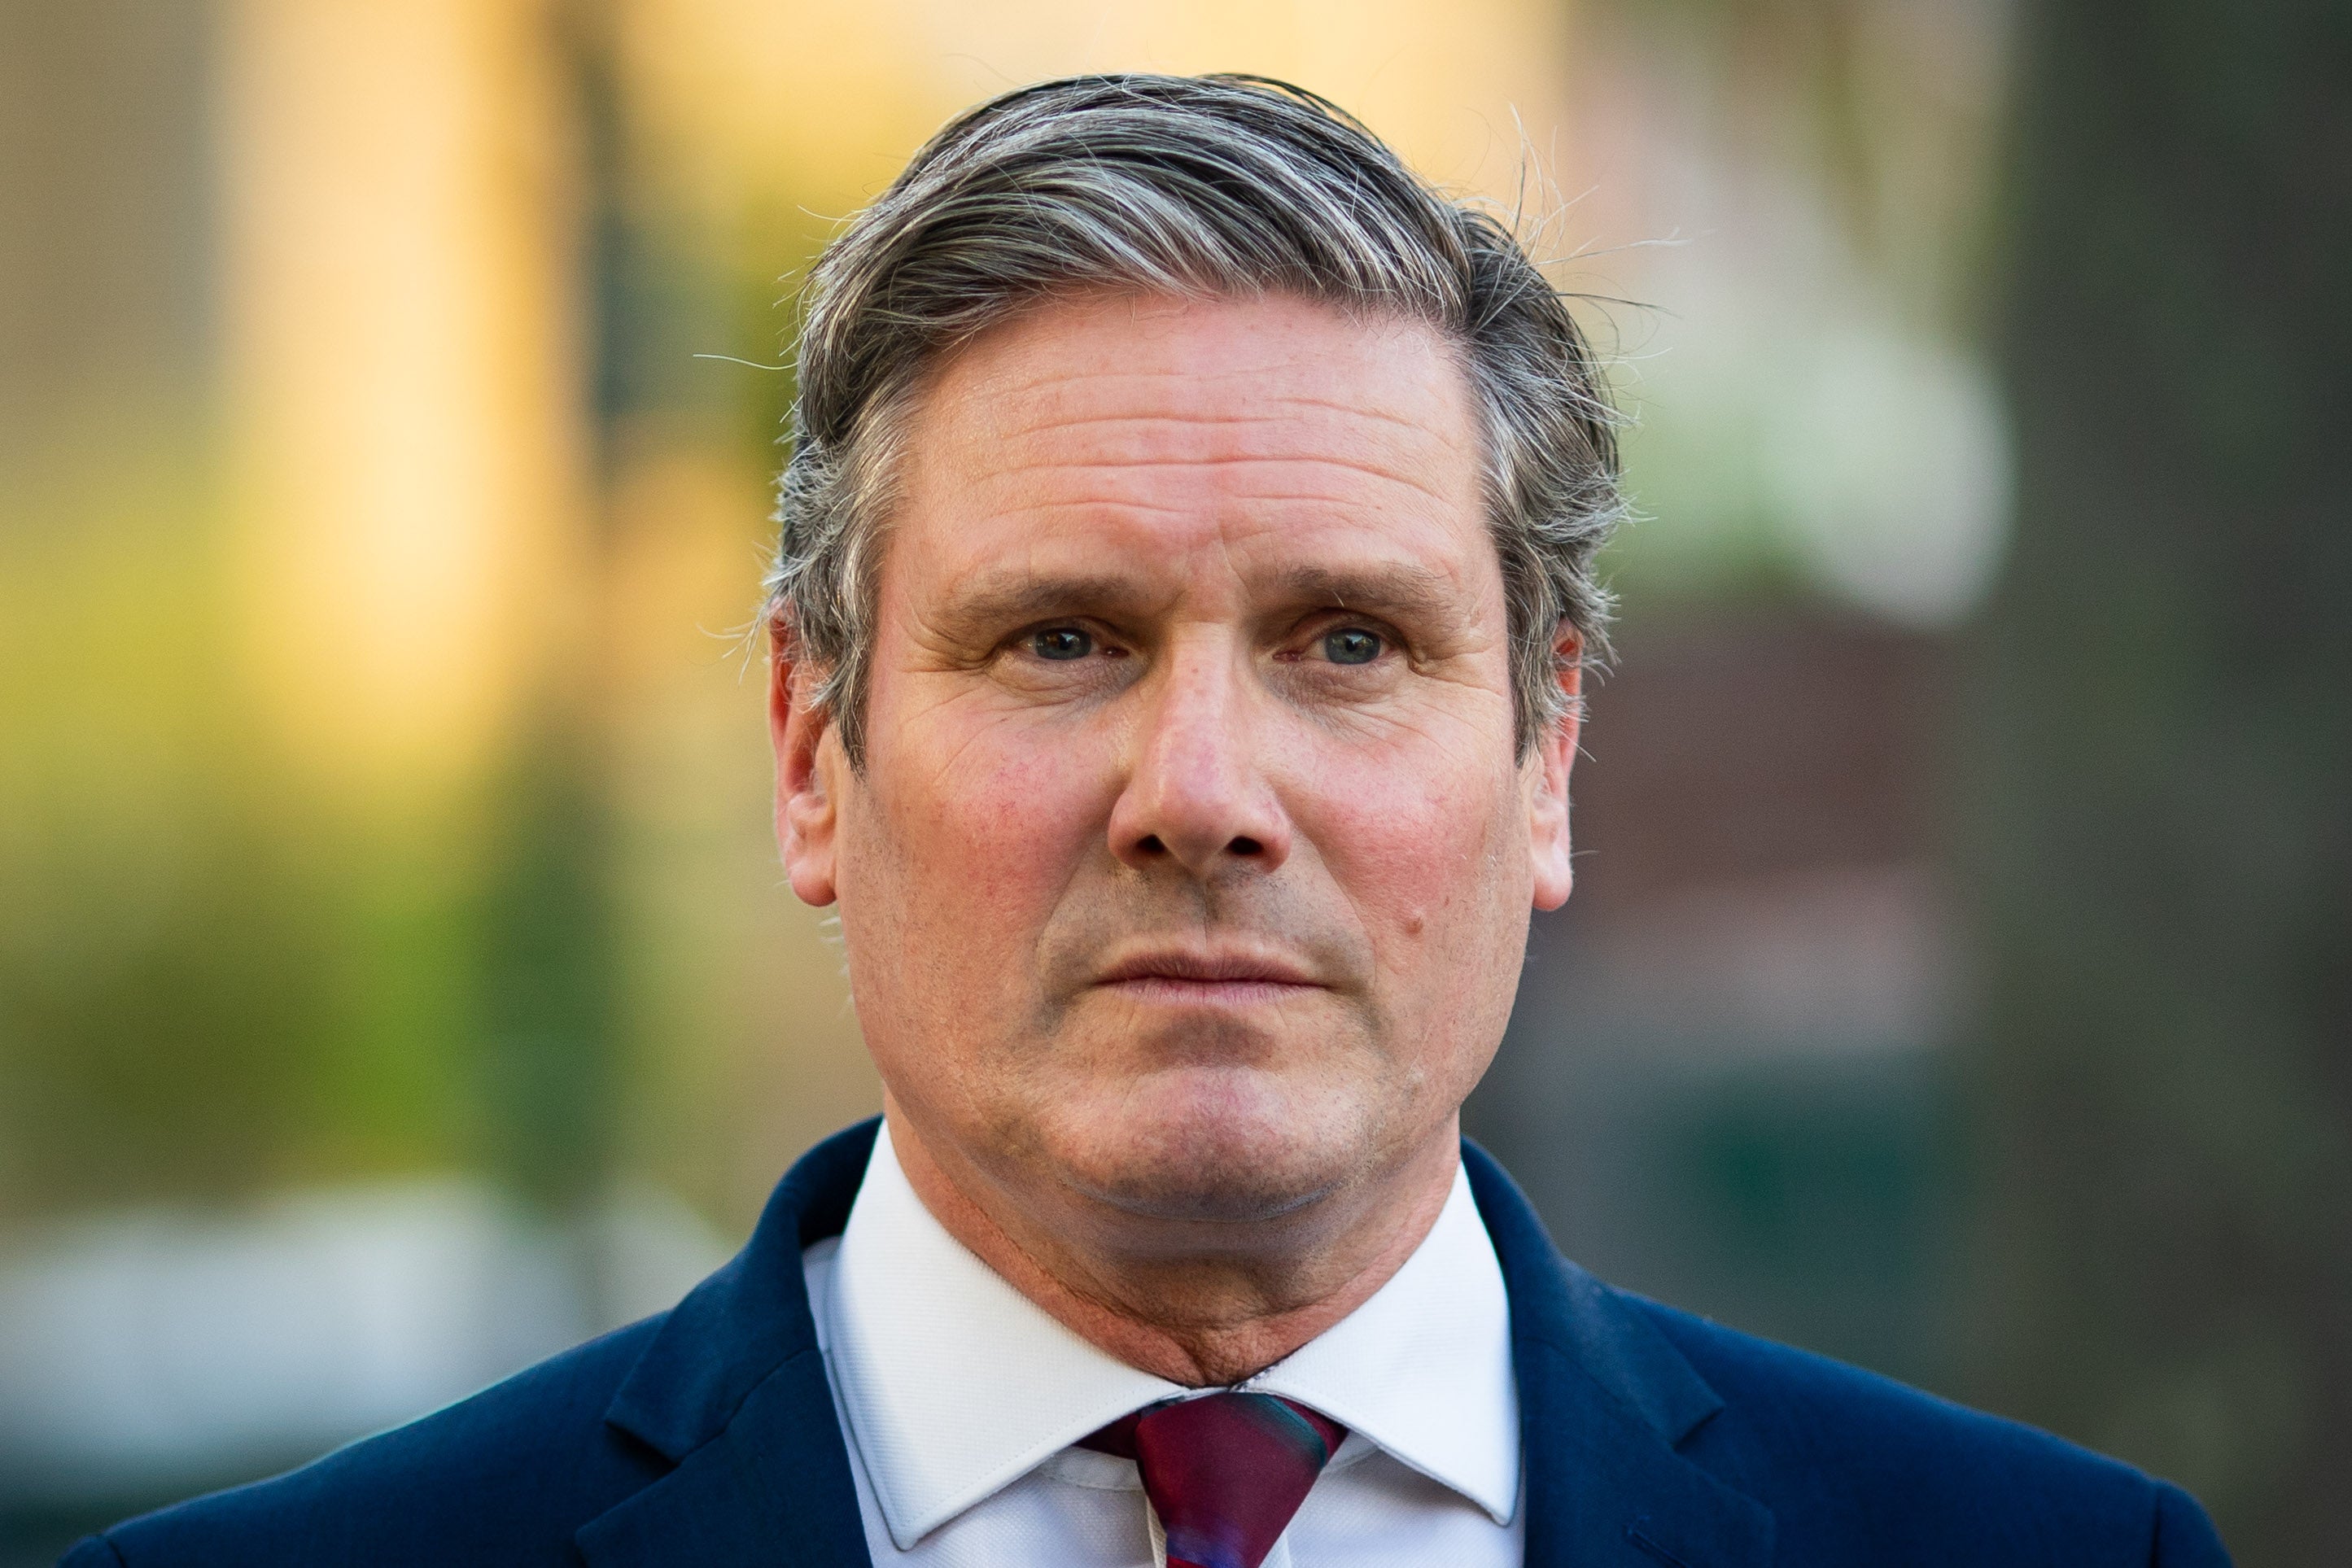 Keir Starmer doesn’t want to gain a reputation for ducking decisions